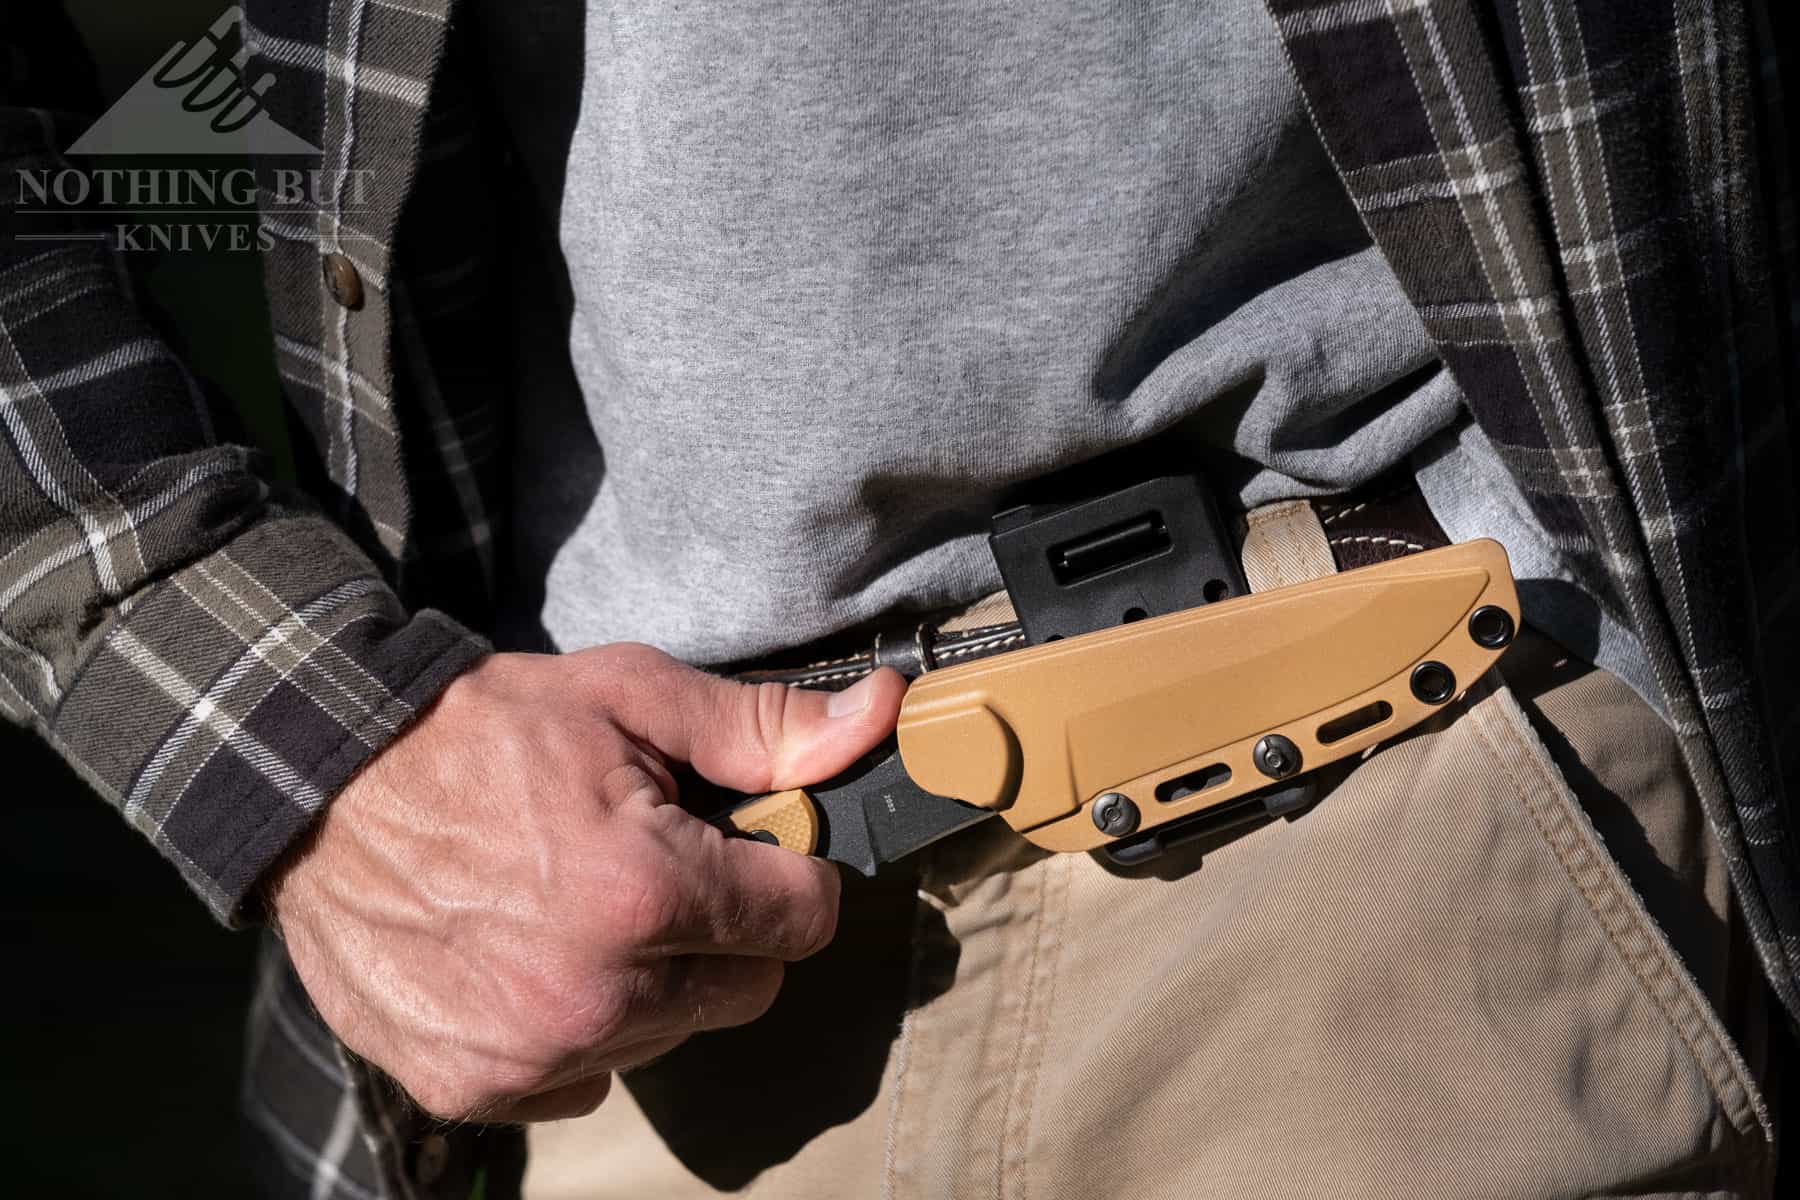 The CRKT Ramadi set up for horizontal carry on the front left side.